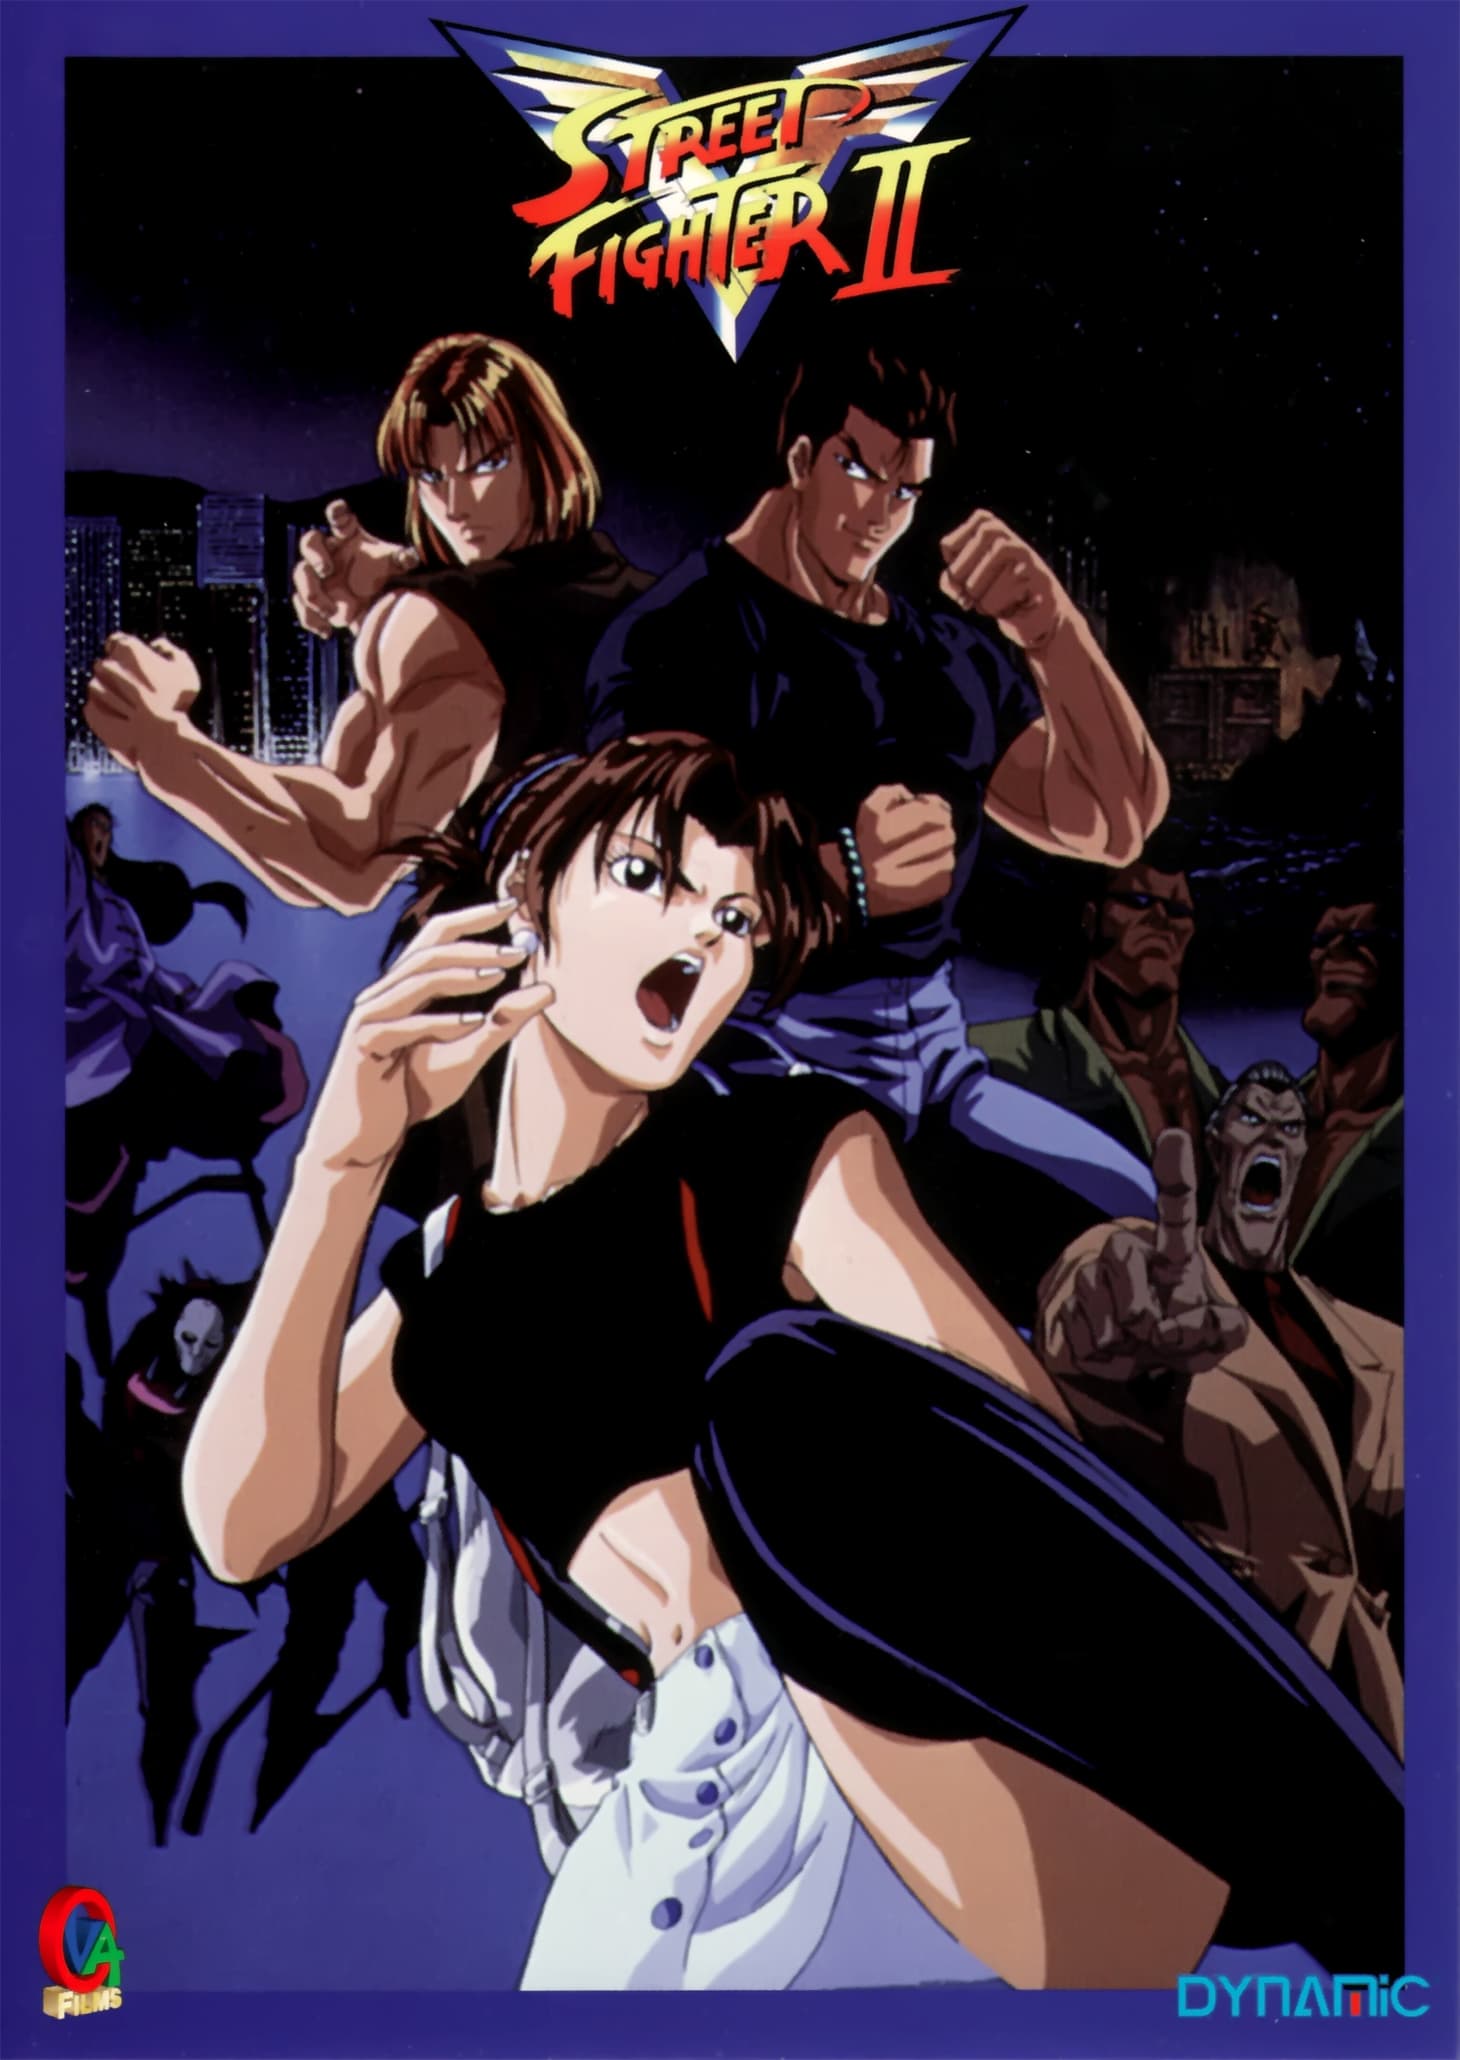 ANIMATION REVIEW: STREET FIGHTER II V—THE COLLECTION (2003) U.S. MANGA  ENTERTAINMENT SET (OUT-OF-PRINT)